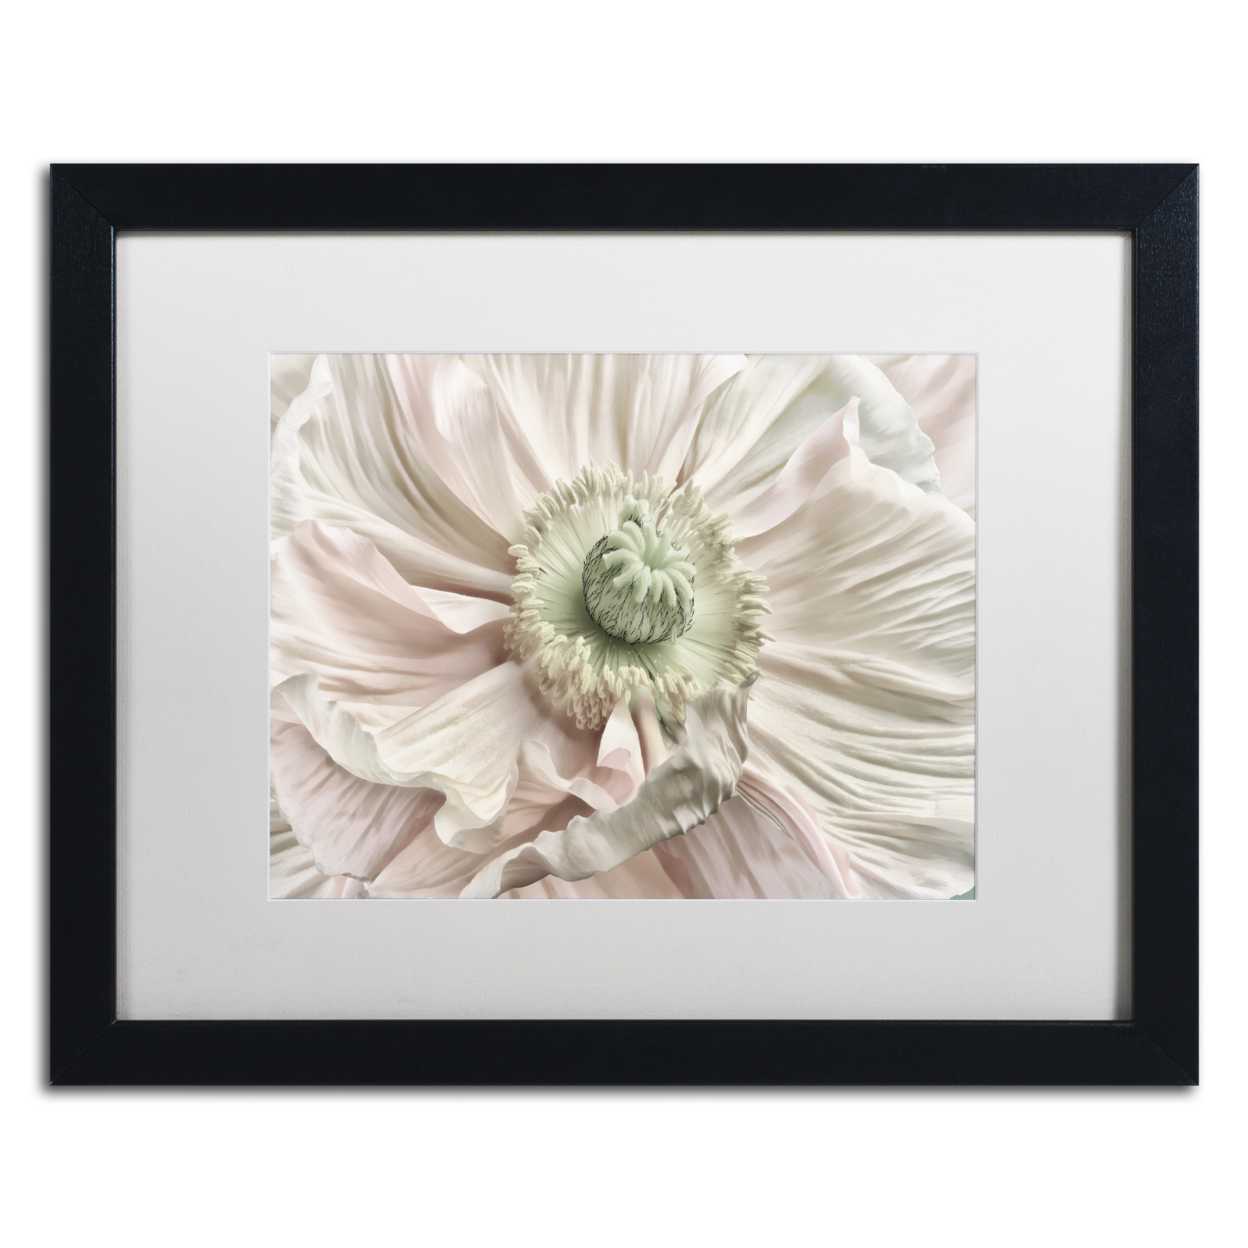 Cora Niele 'Pink Poppy' Black Wooden Framed Art 18 X 22 Inches